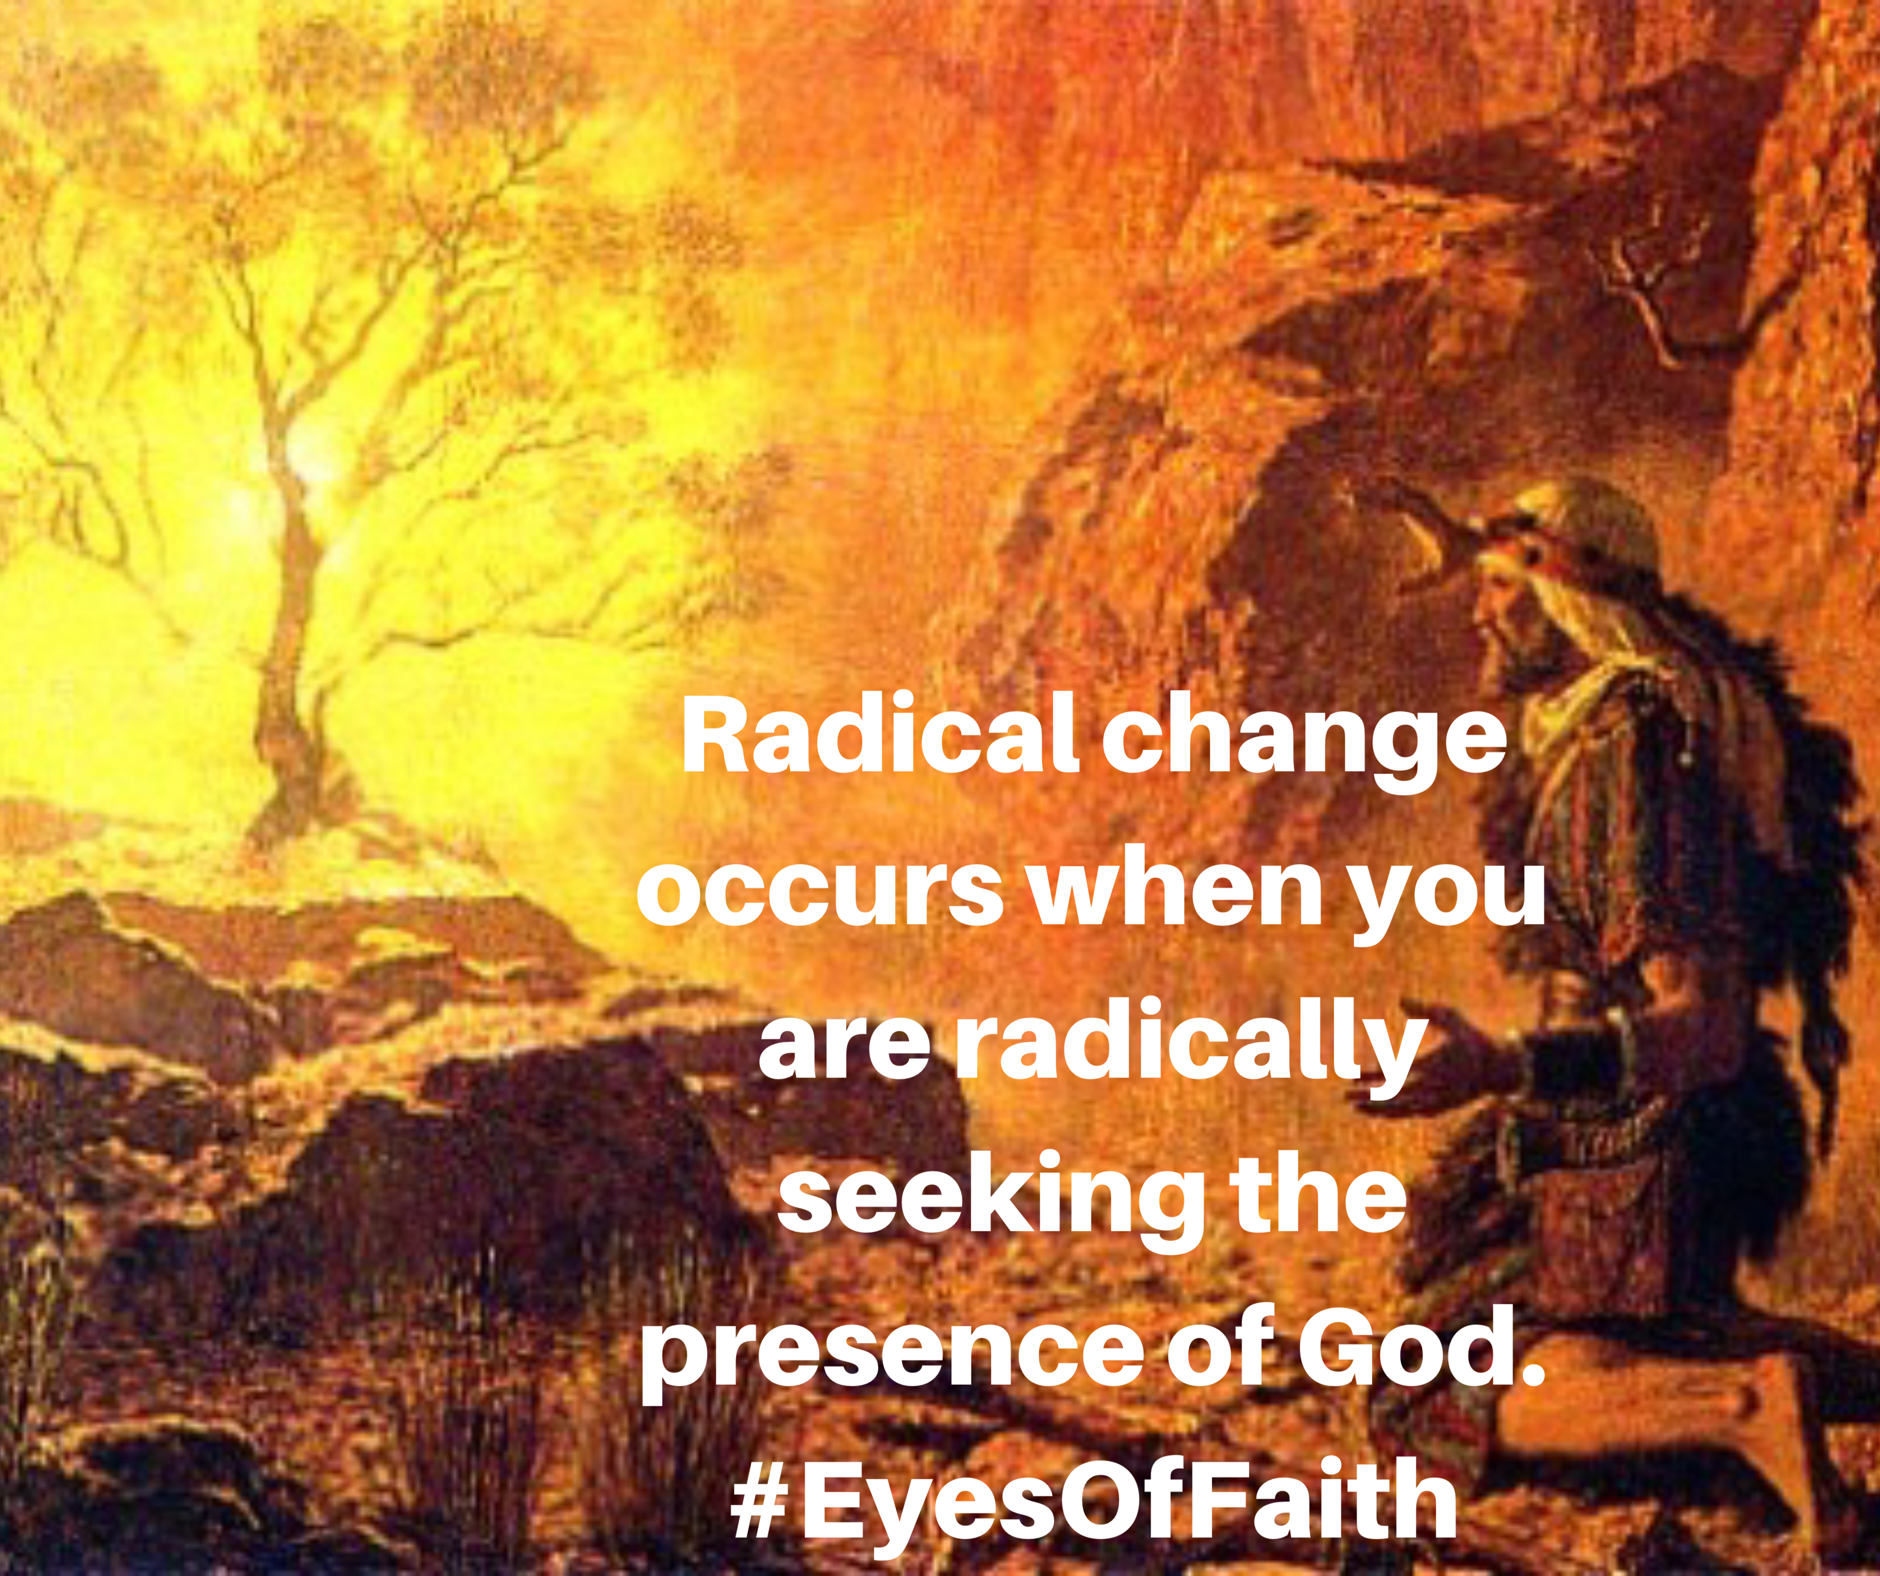 Are You Willing to Radically Seek God?